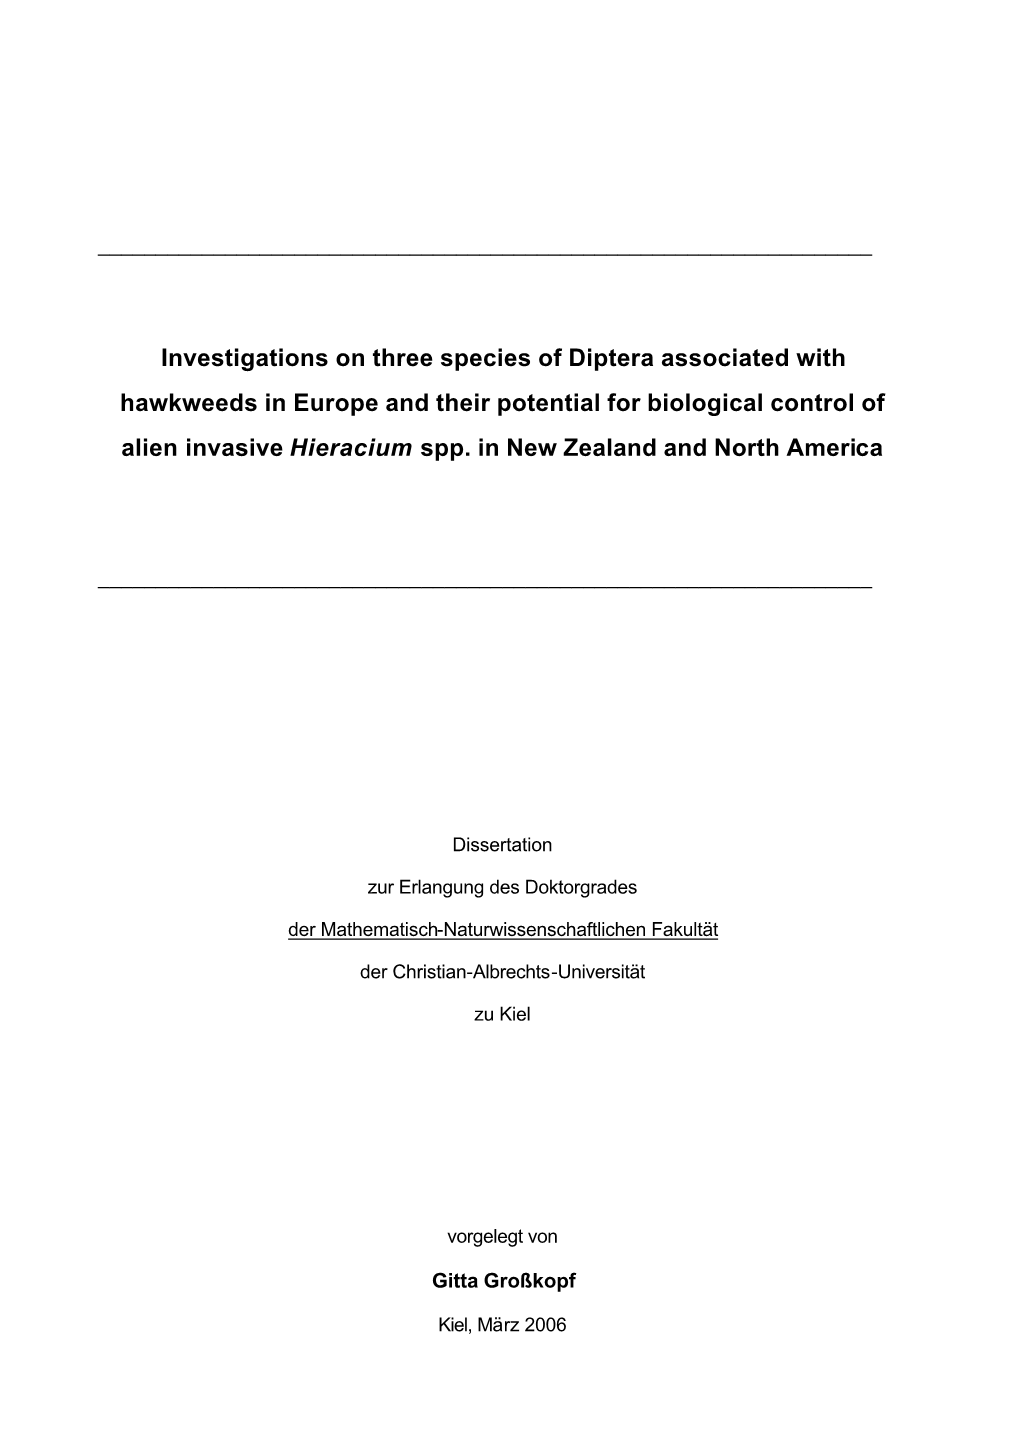 Investigations on Three Species of Diptera Associated with Hawkweeds in Europe and Their Potential for Biological Control of Alien Invasive Hieracium Spp